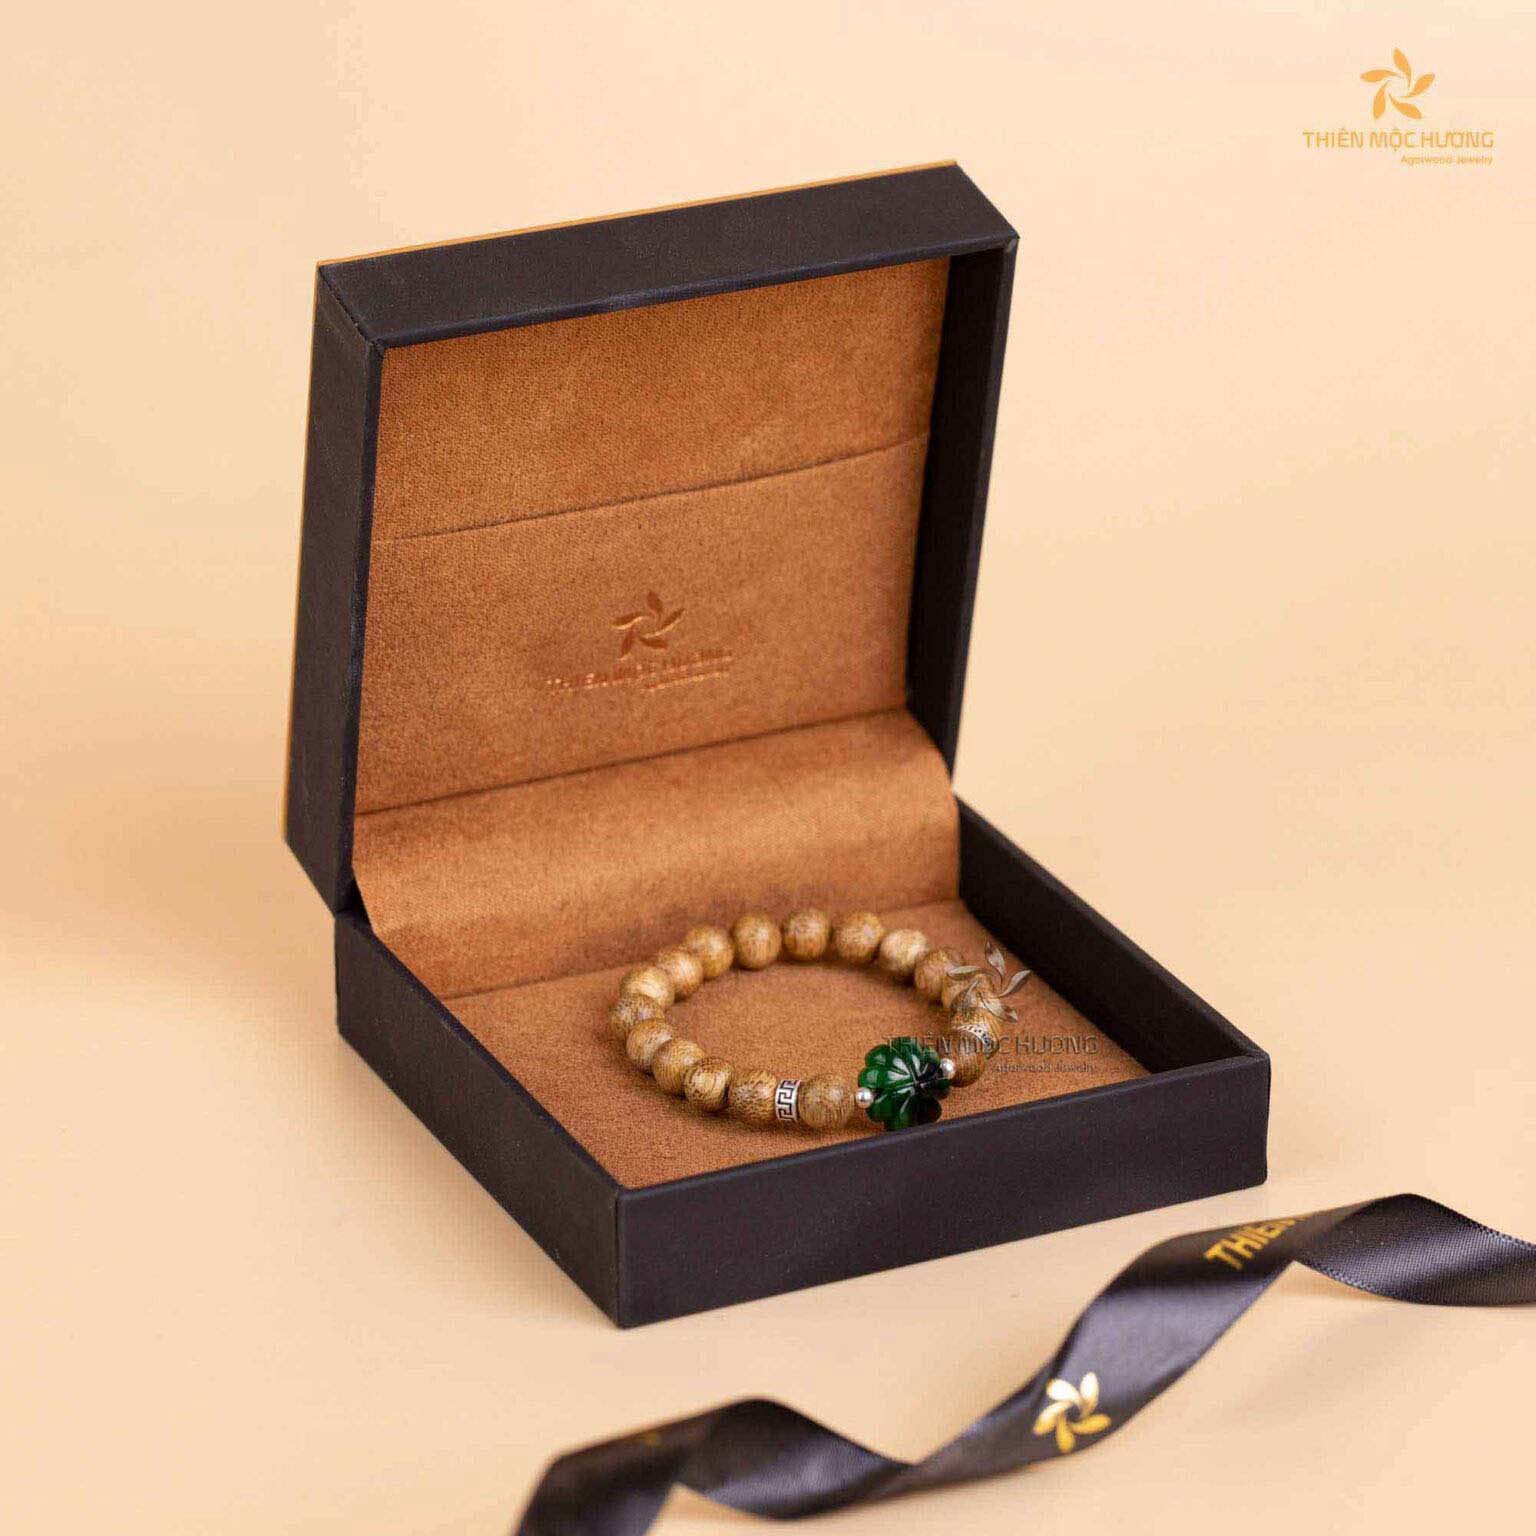 Consider keeping it in a jewelry box or pouch to protect your bracelet from potential harm